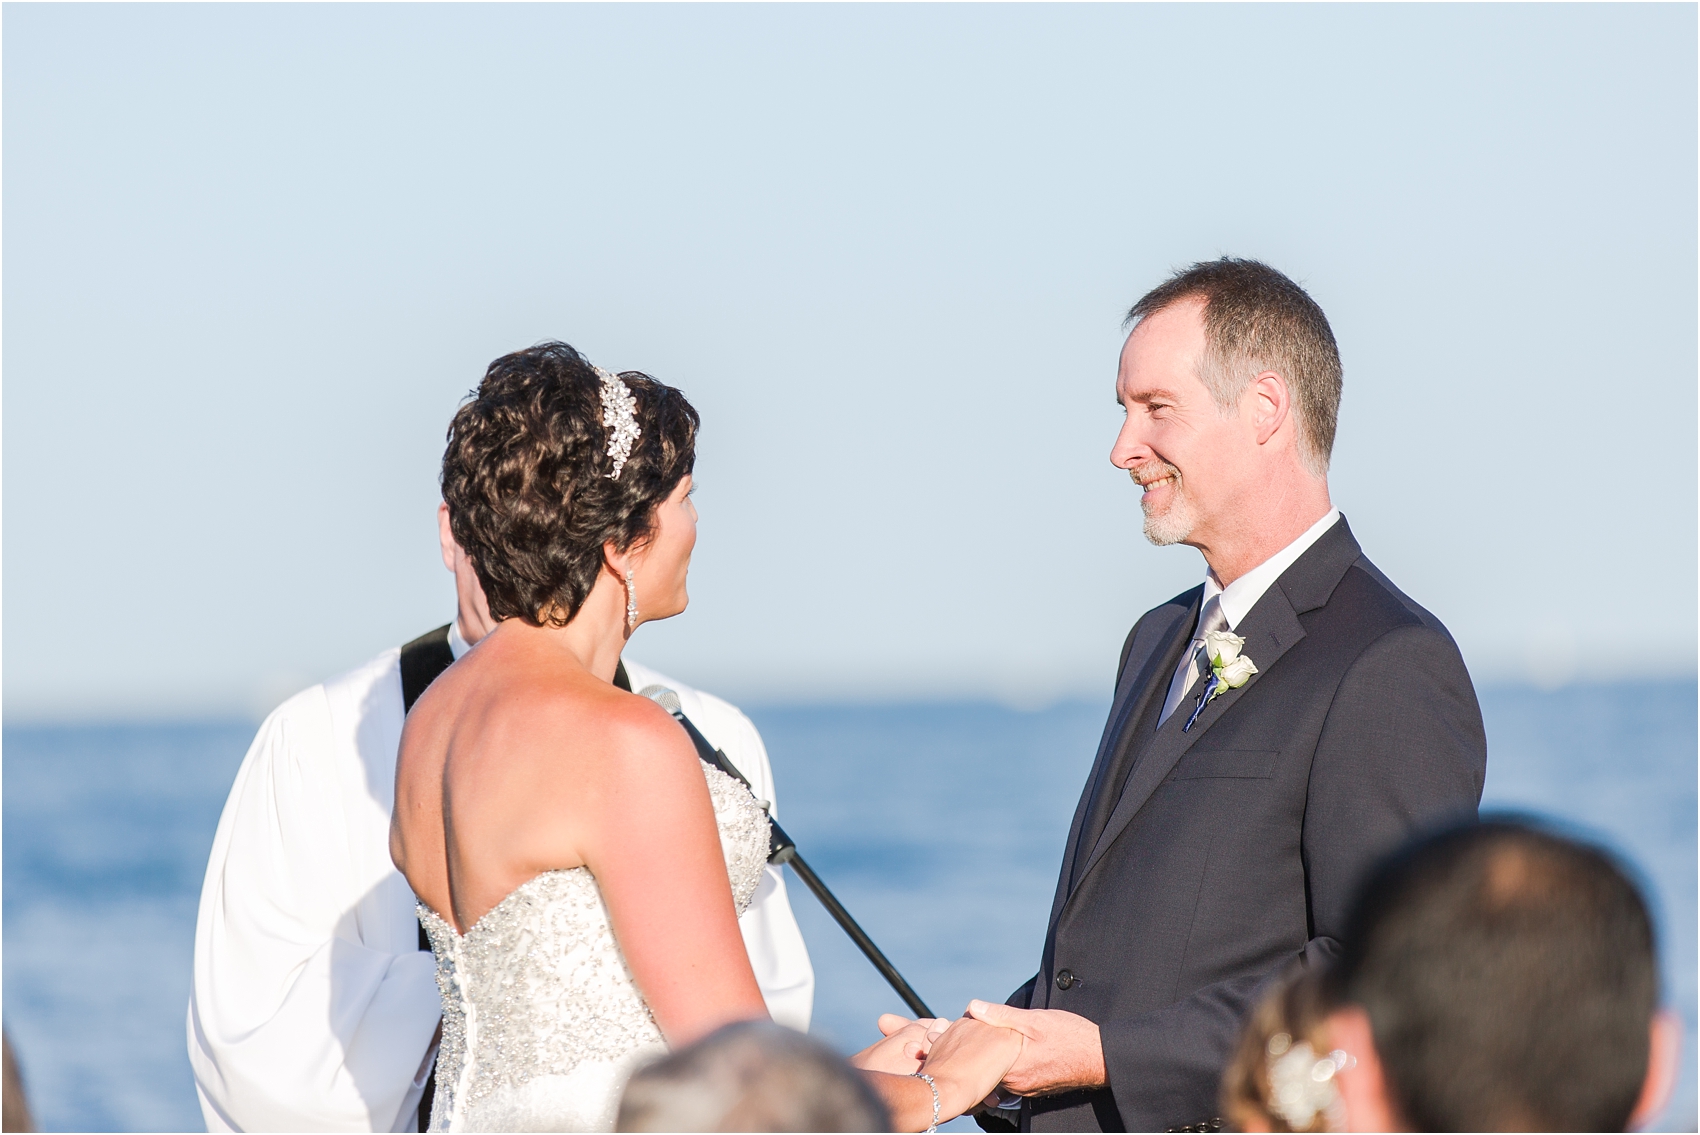 classic-natuical-inspired-wedding-photos-on-infinity-ovation-yacht-in-st-clair-shores-mi-by-courtney-carolyn-photography_0051.jpg